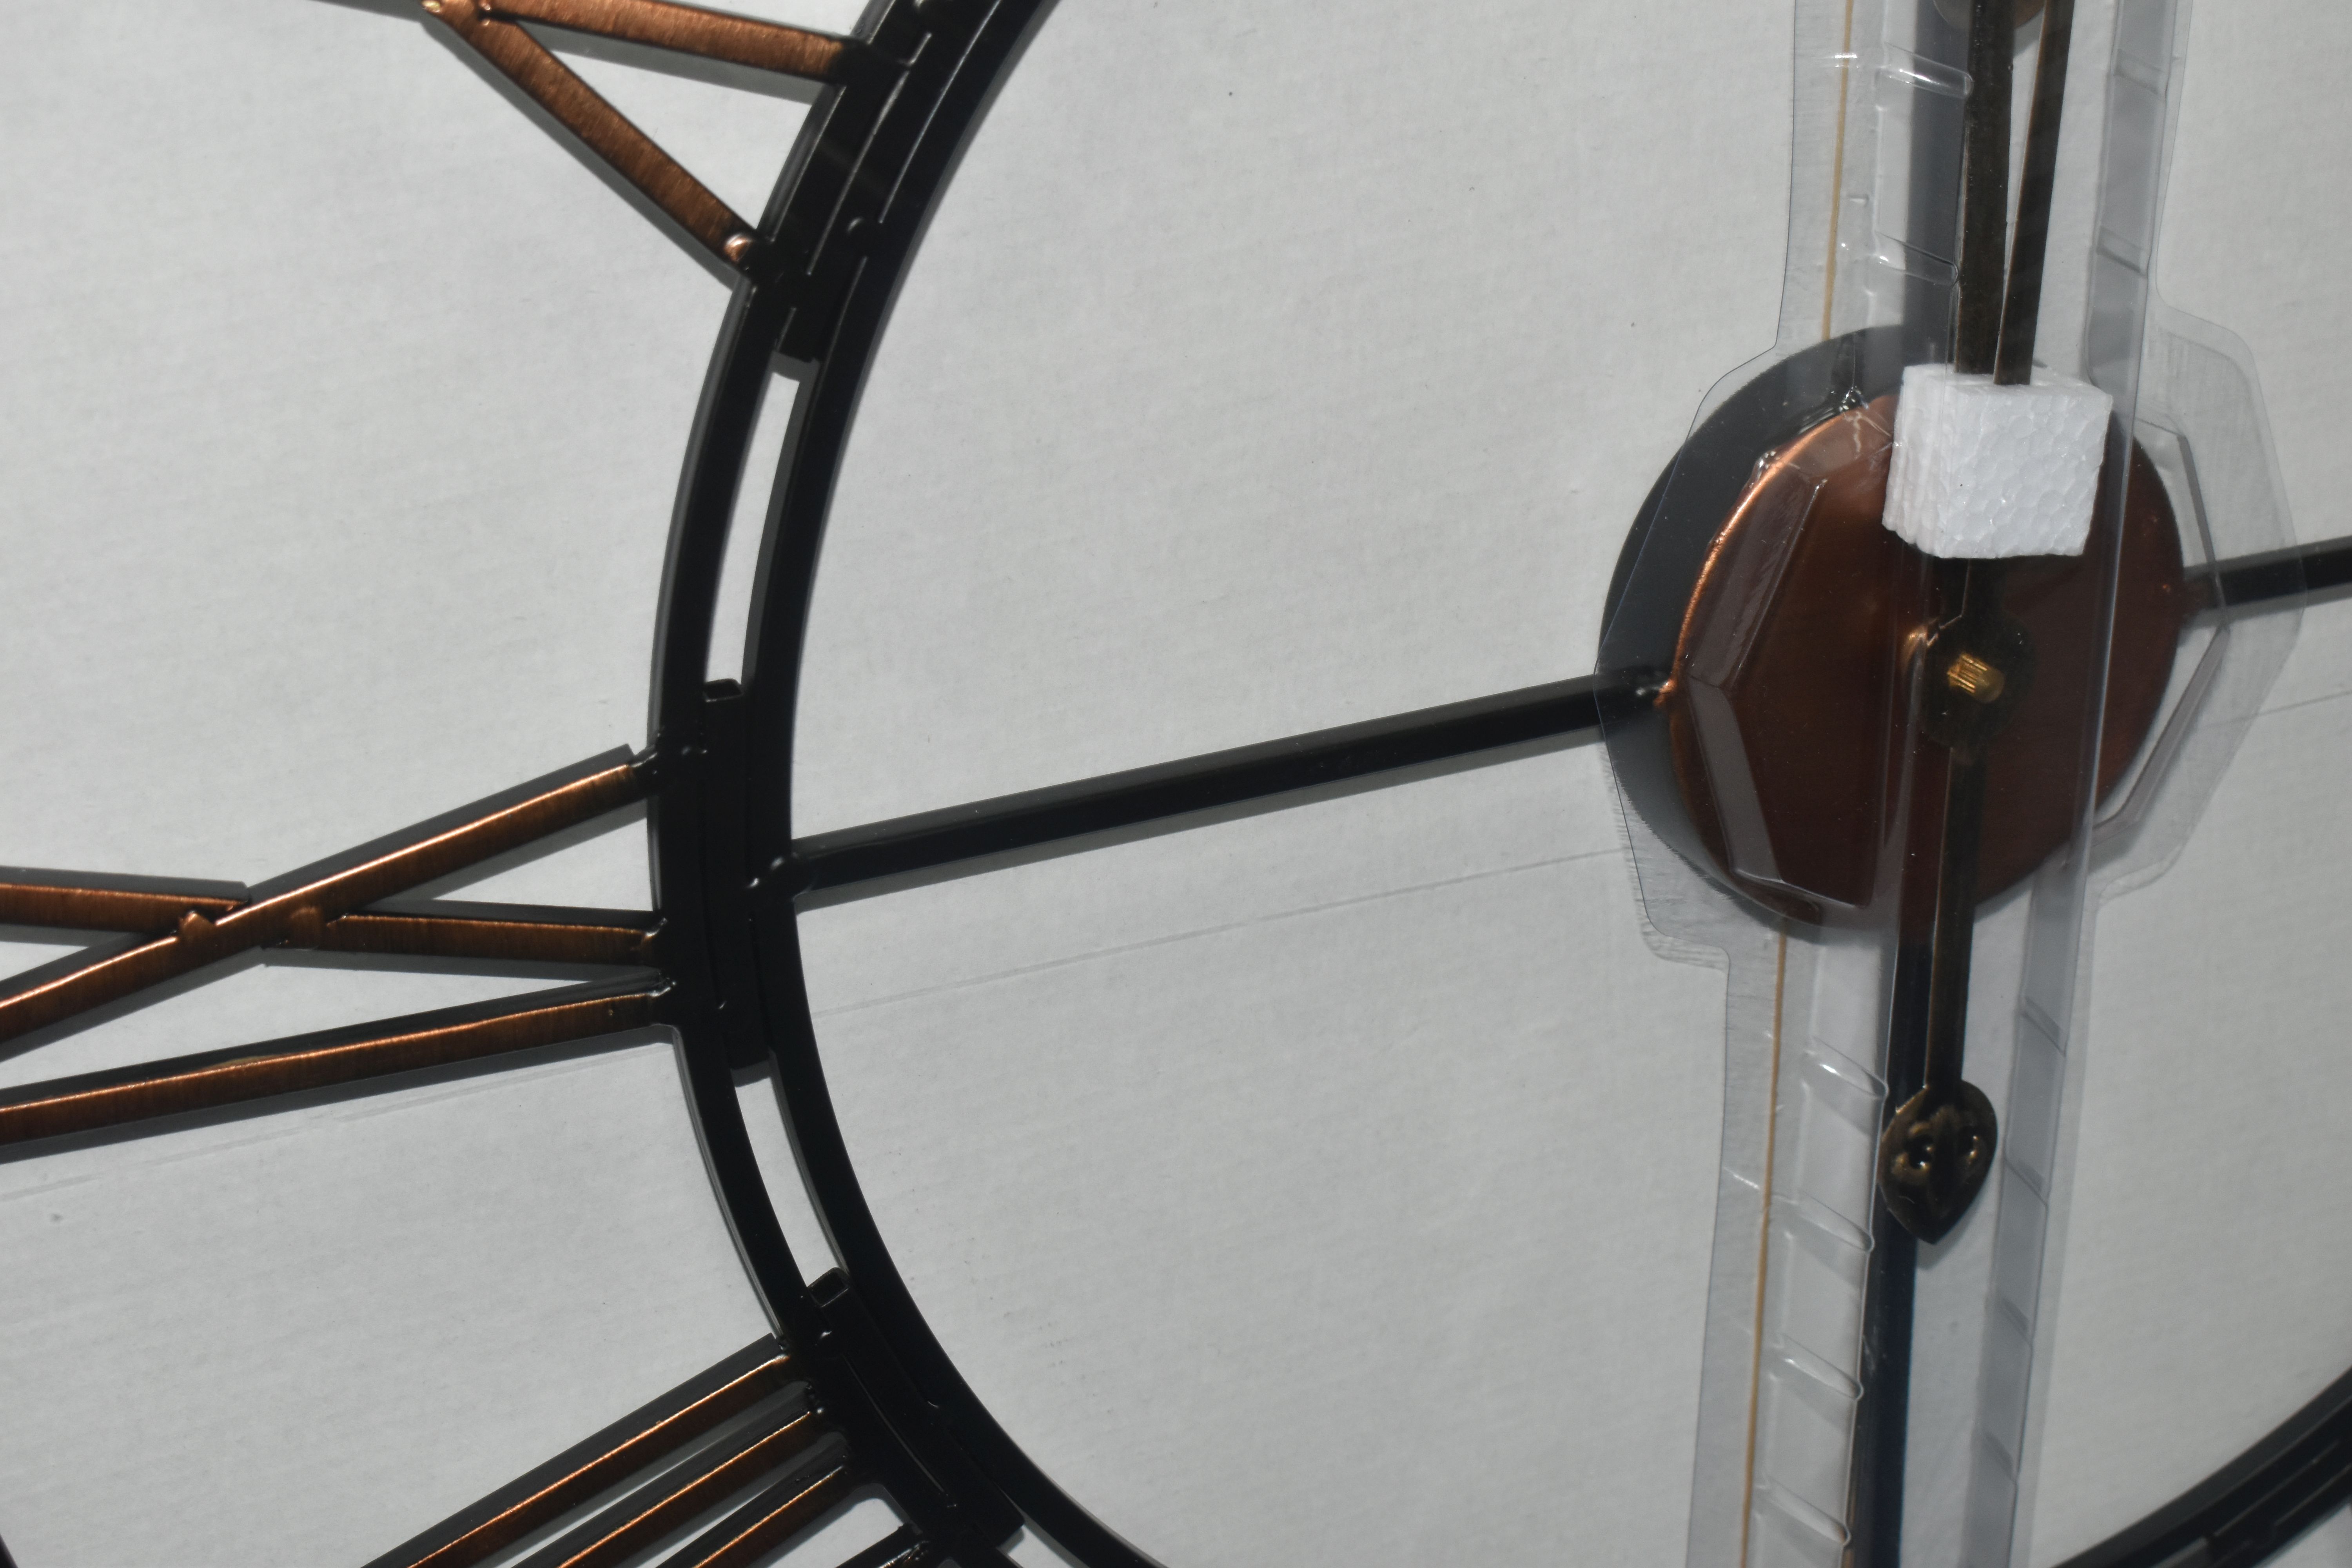 A BOXED 'LIBRA' UNUSED WALL CLOCK, a black and bronze coloured metal wall clock with Roman numerals, - Image 2 of 2